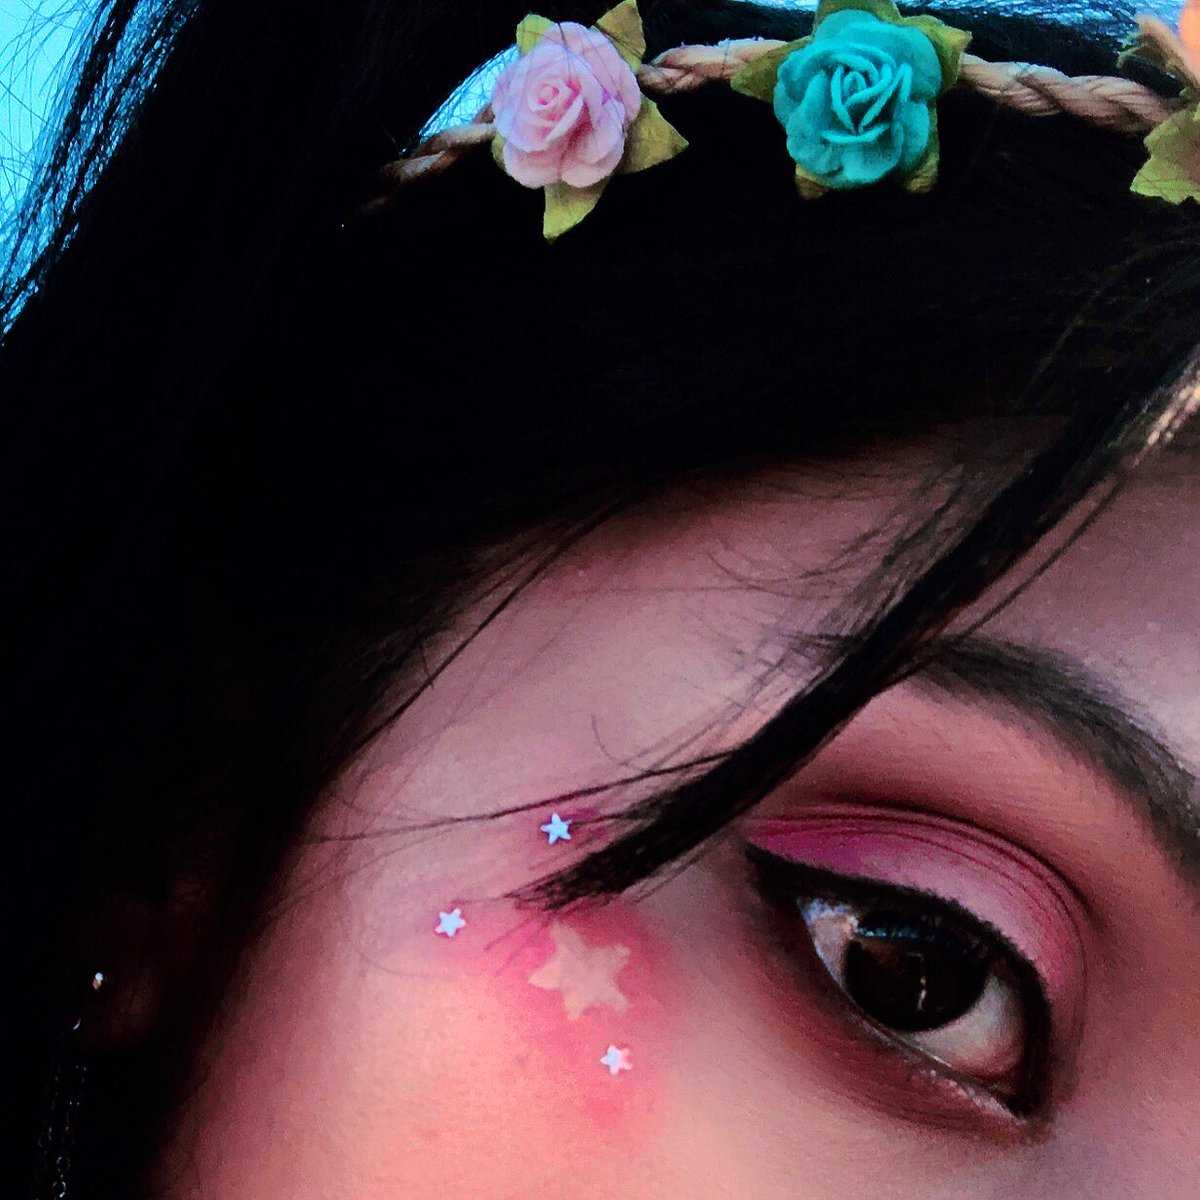 i tried something different yesterday for my brighton trip..
#aesthetic #makeup #koreanmakeup #prettymakeup #faceart #stars